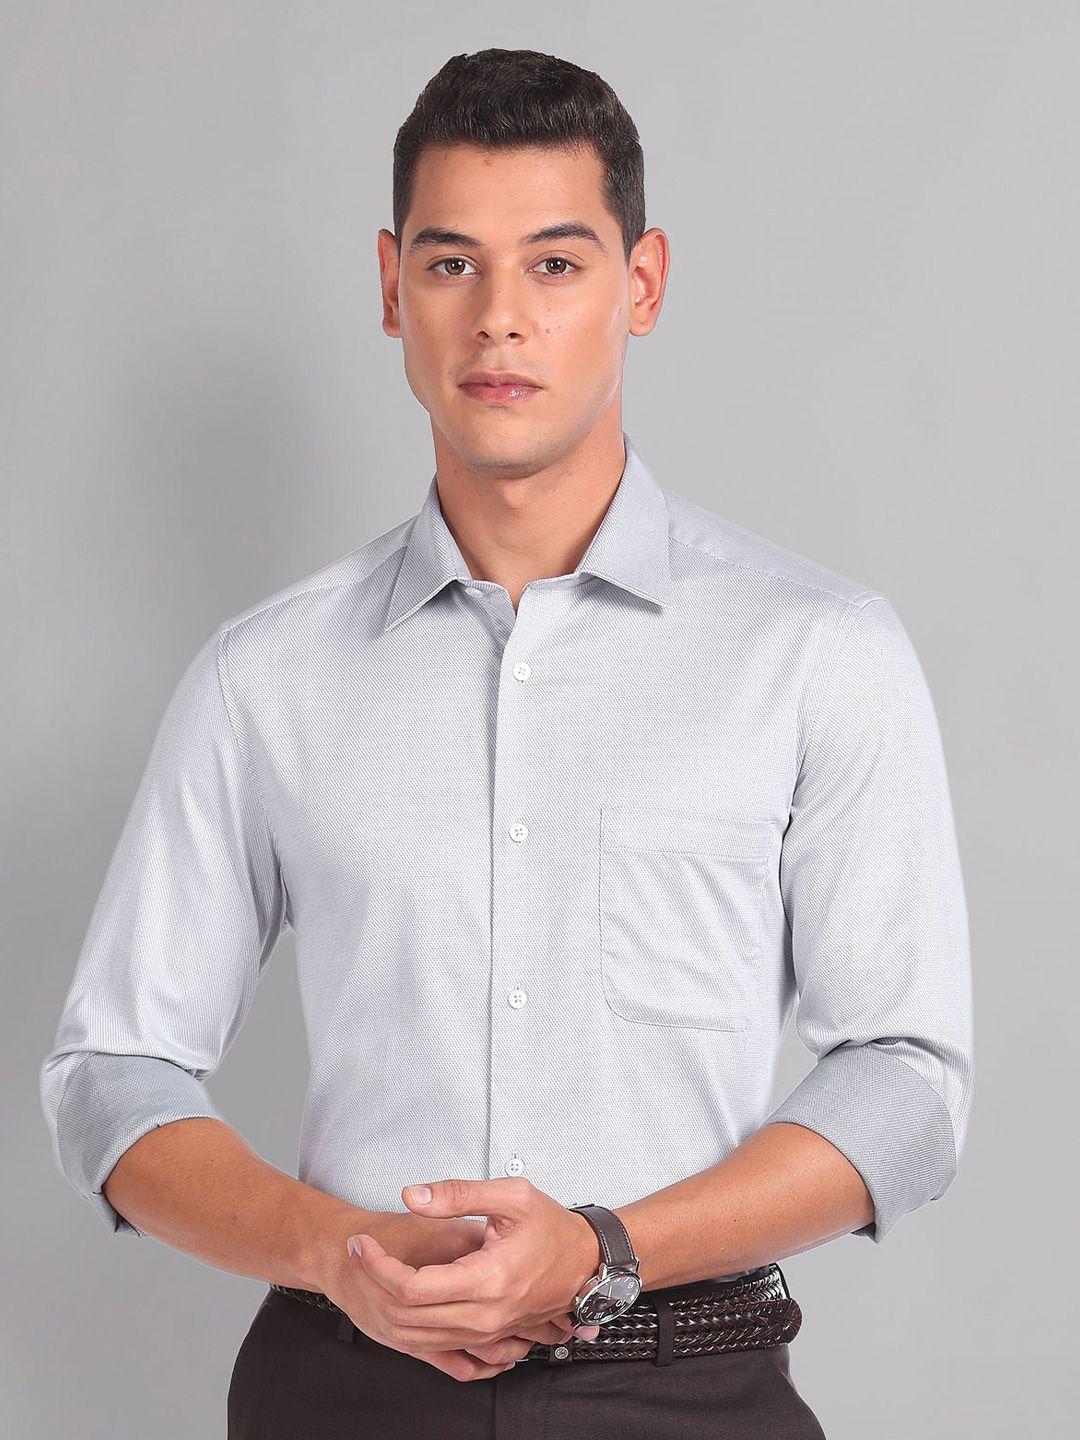 ad by arvind spread collar opaque cotton casual shirt